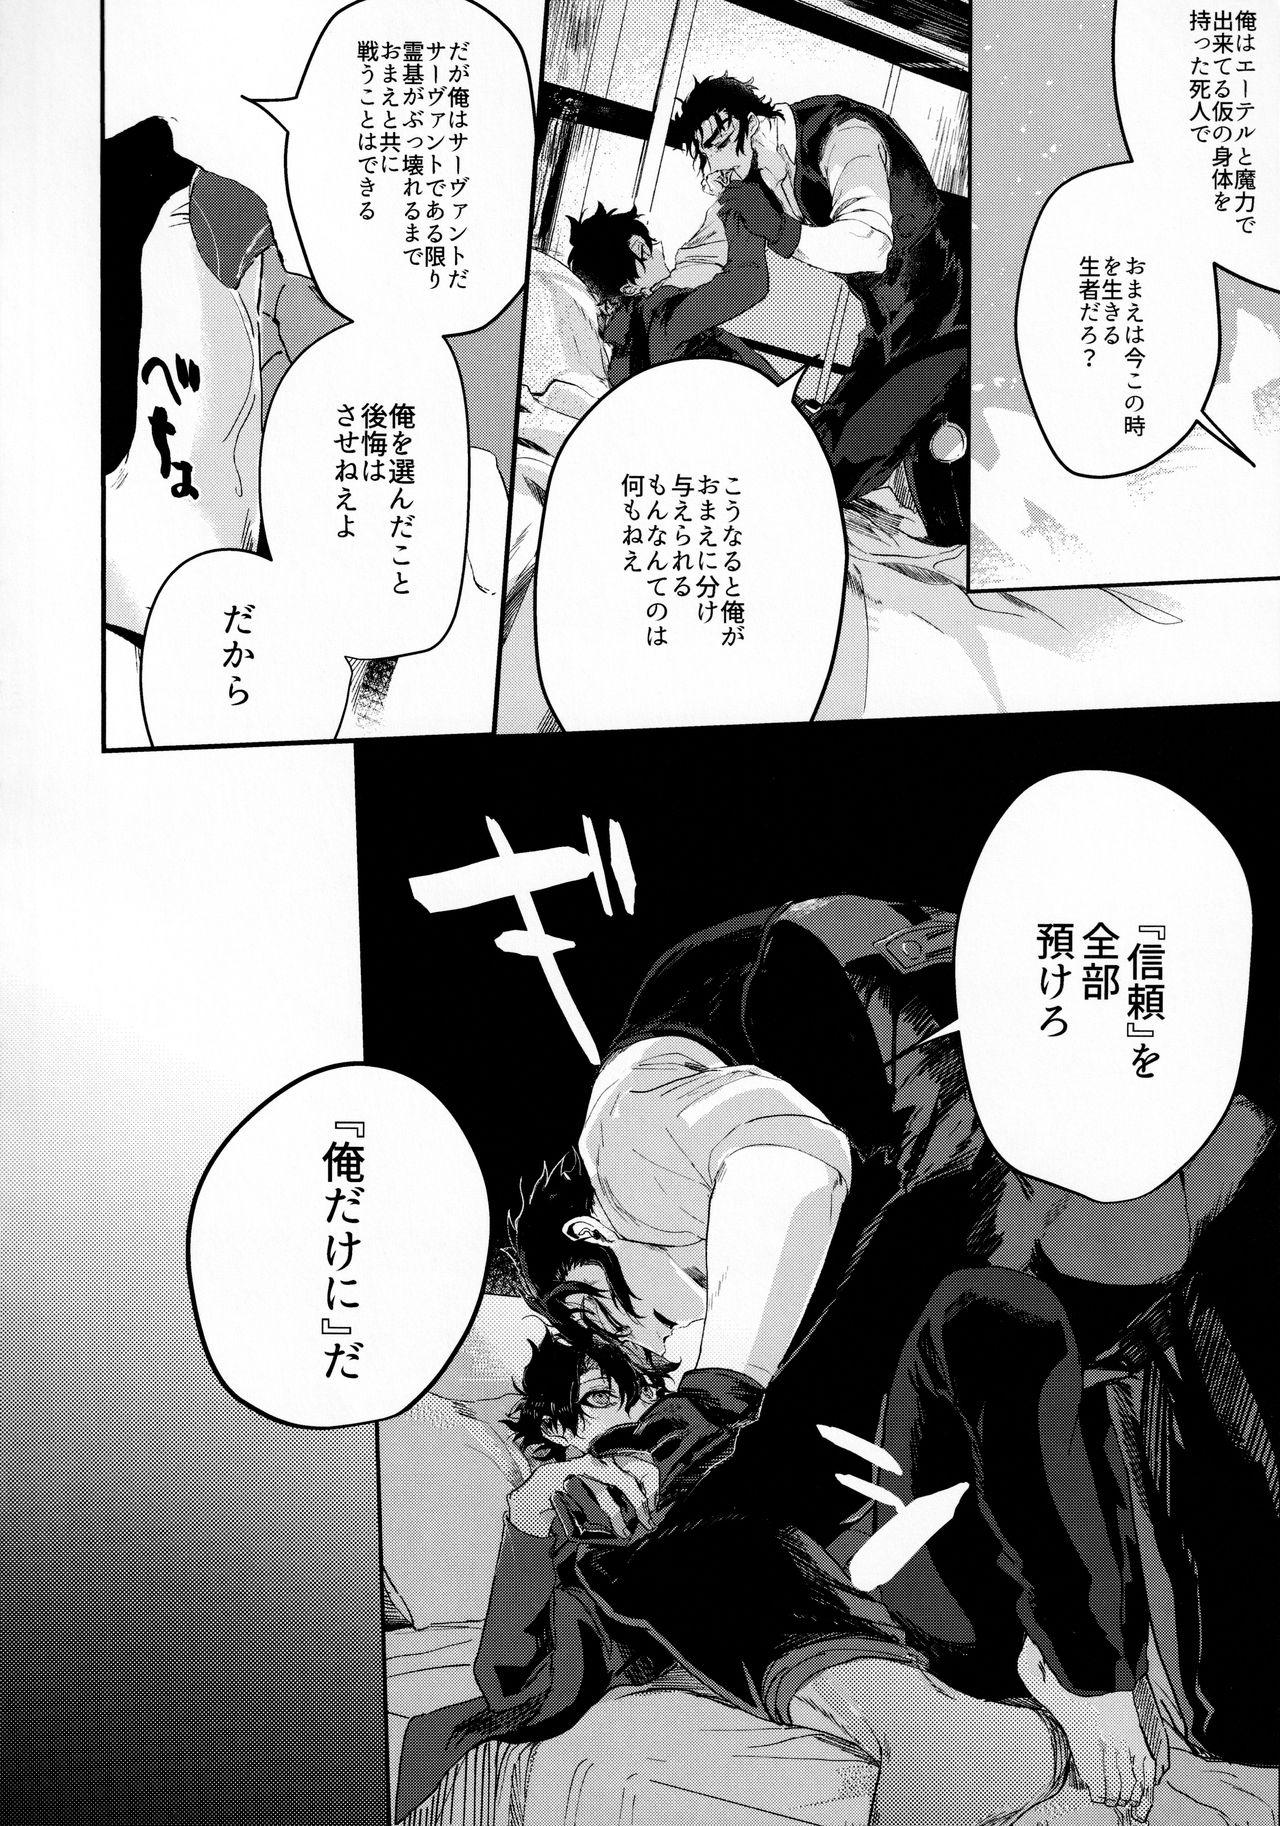 Assfucked 耽溺と熱 - Fate grand order Classy - Page 11